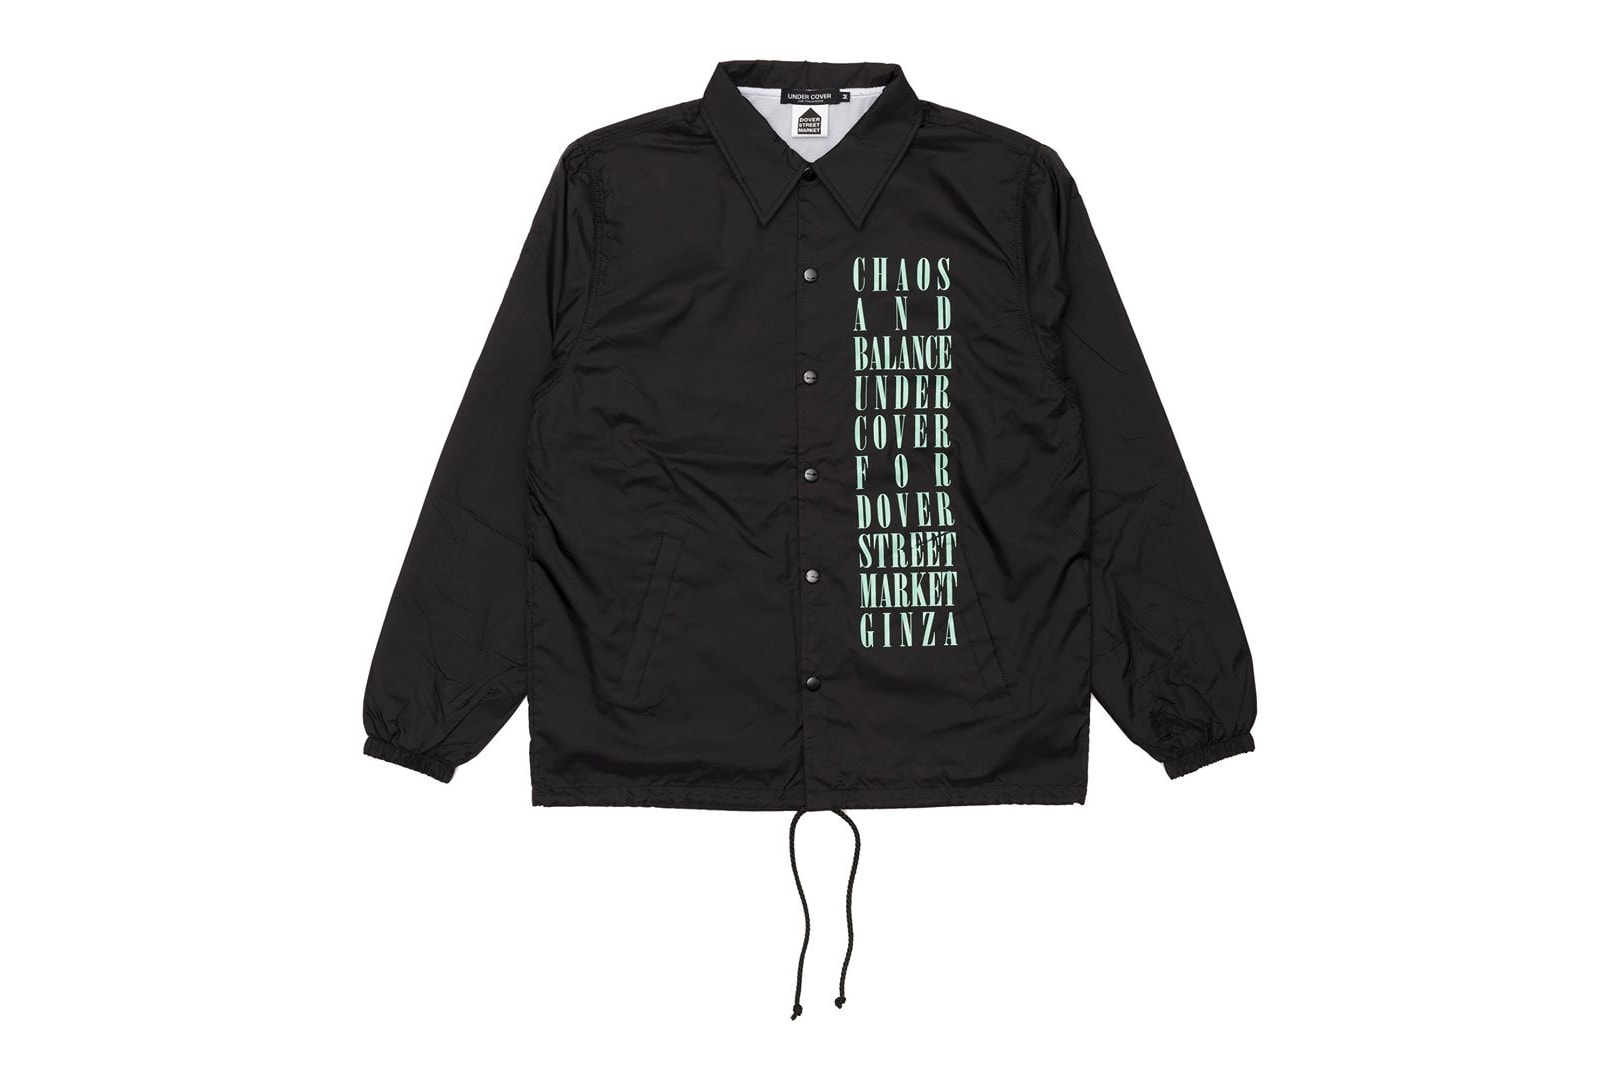 UNDERCOVER Dover Street Market Ginza 5th Anniversary Chaos and Balance Rocker Jacket Front